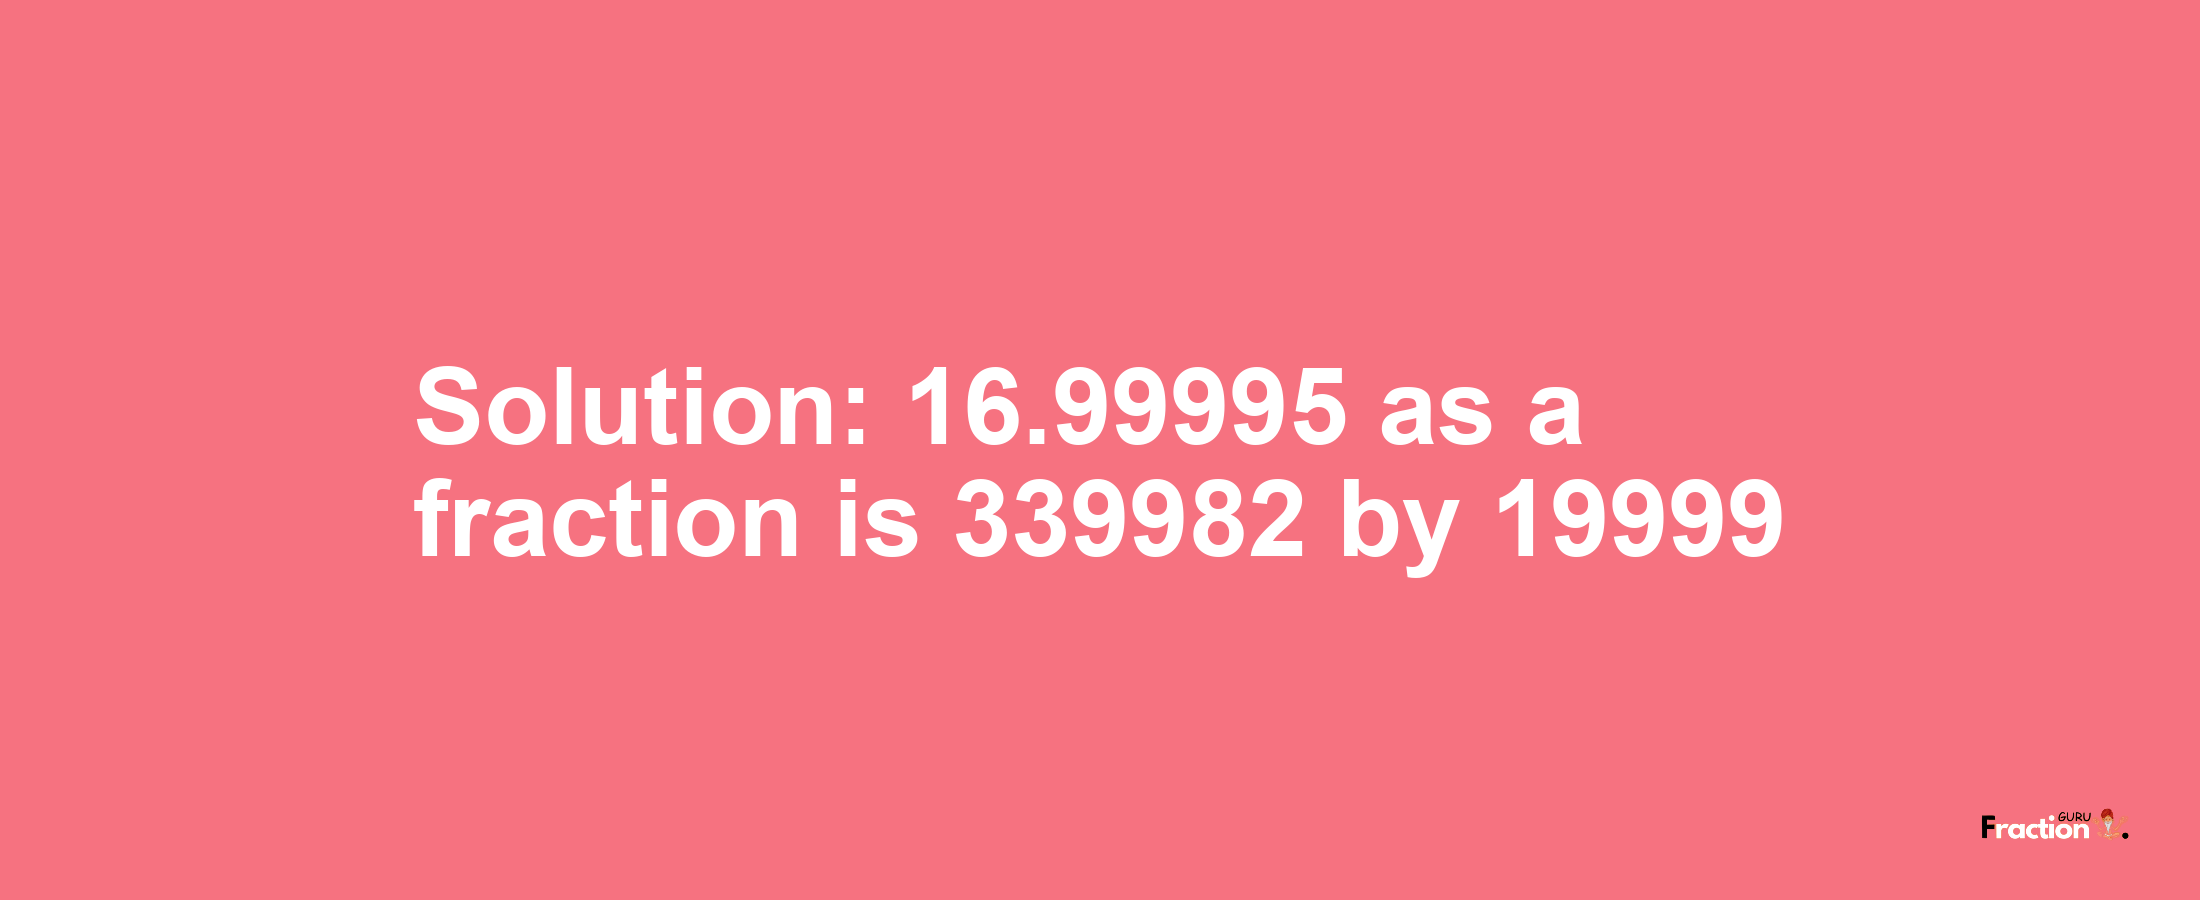 Solution:16.99995 as a fraction is 339982/19999